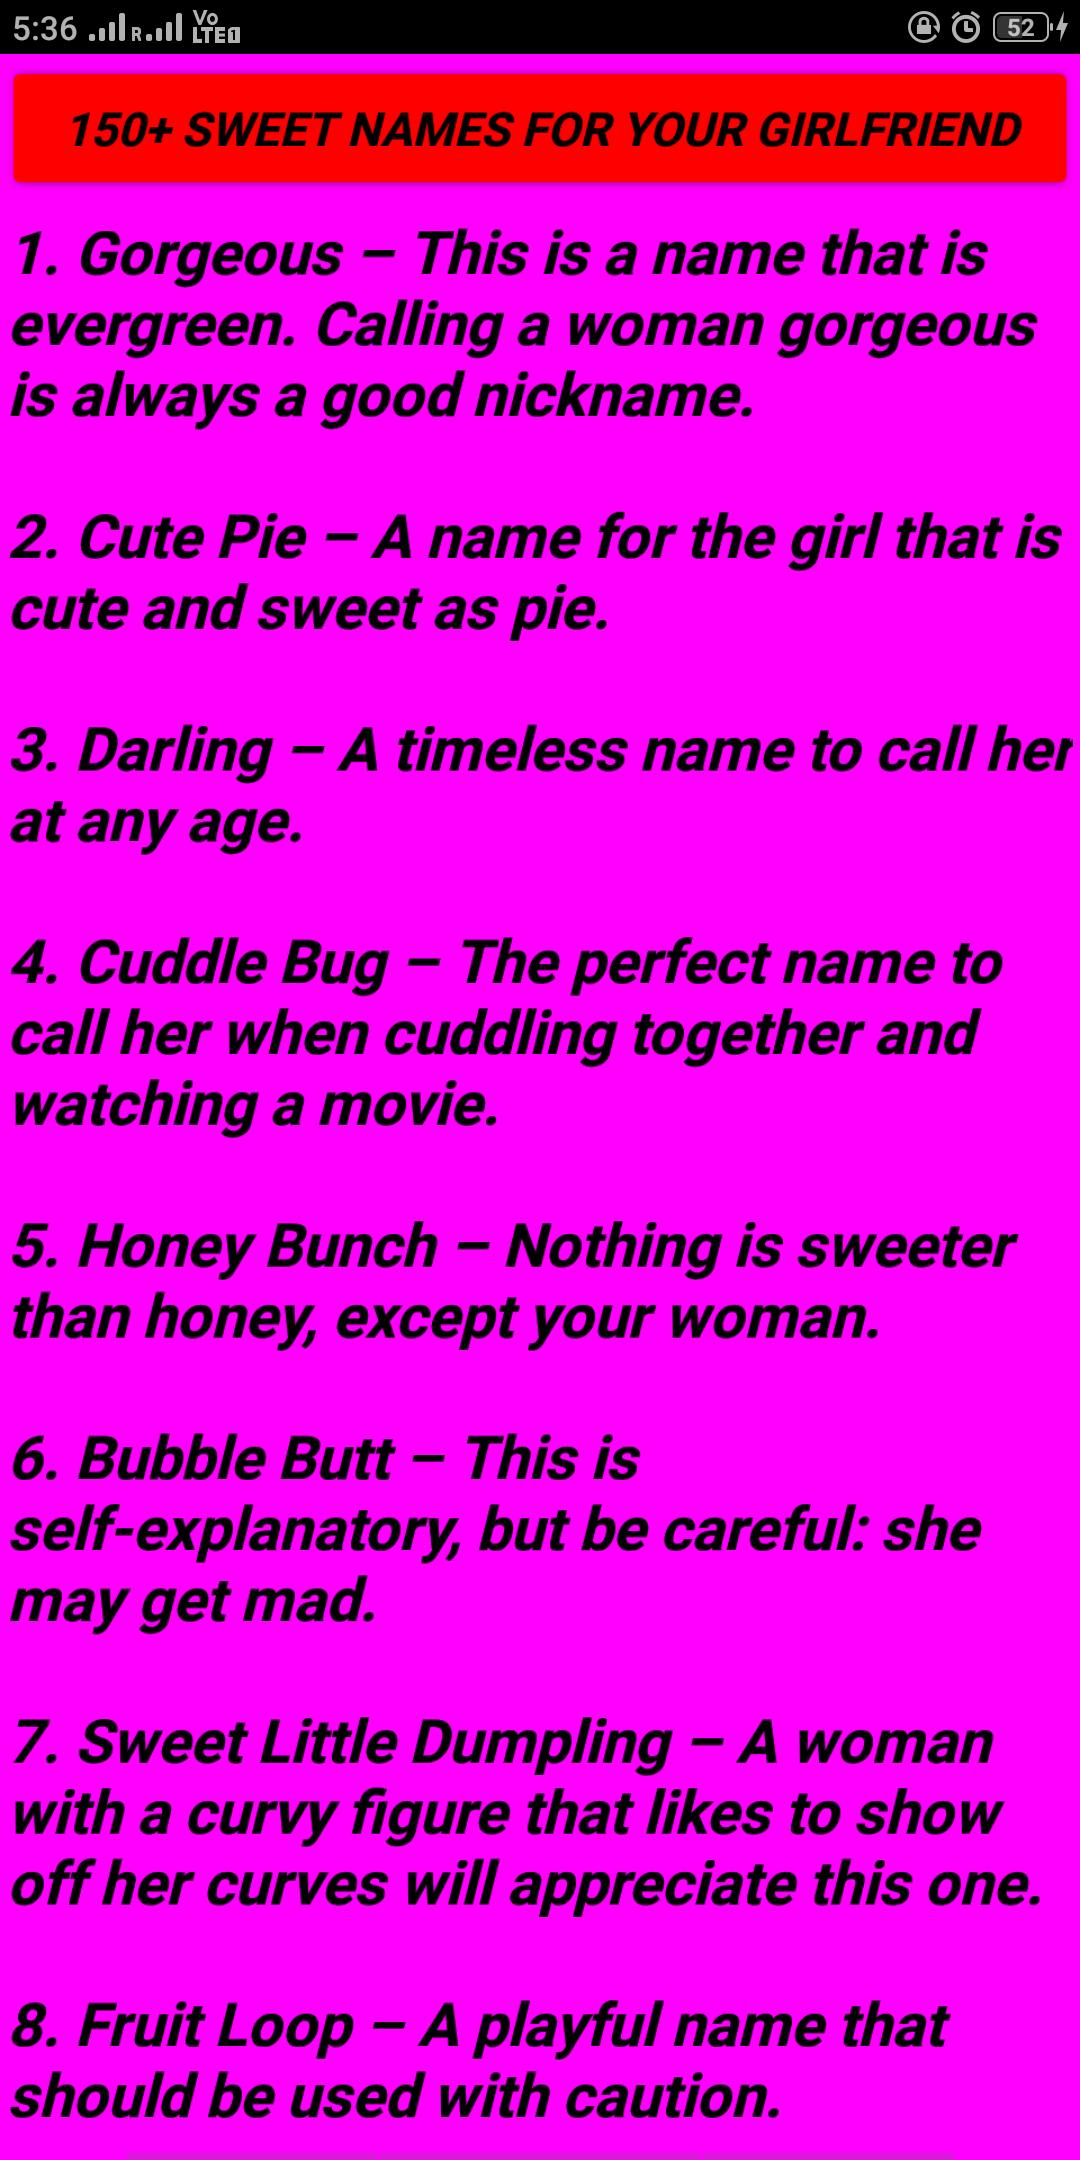 Girlfriend romantic your names for 50 Cutest